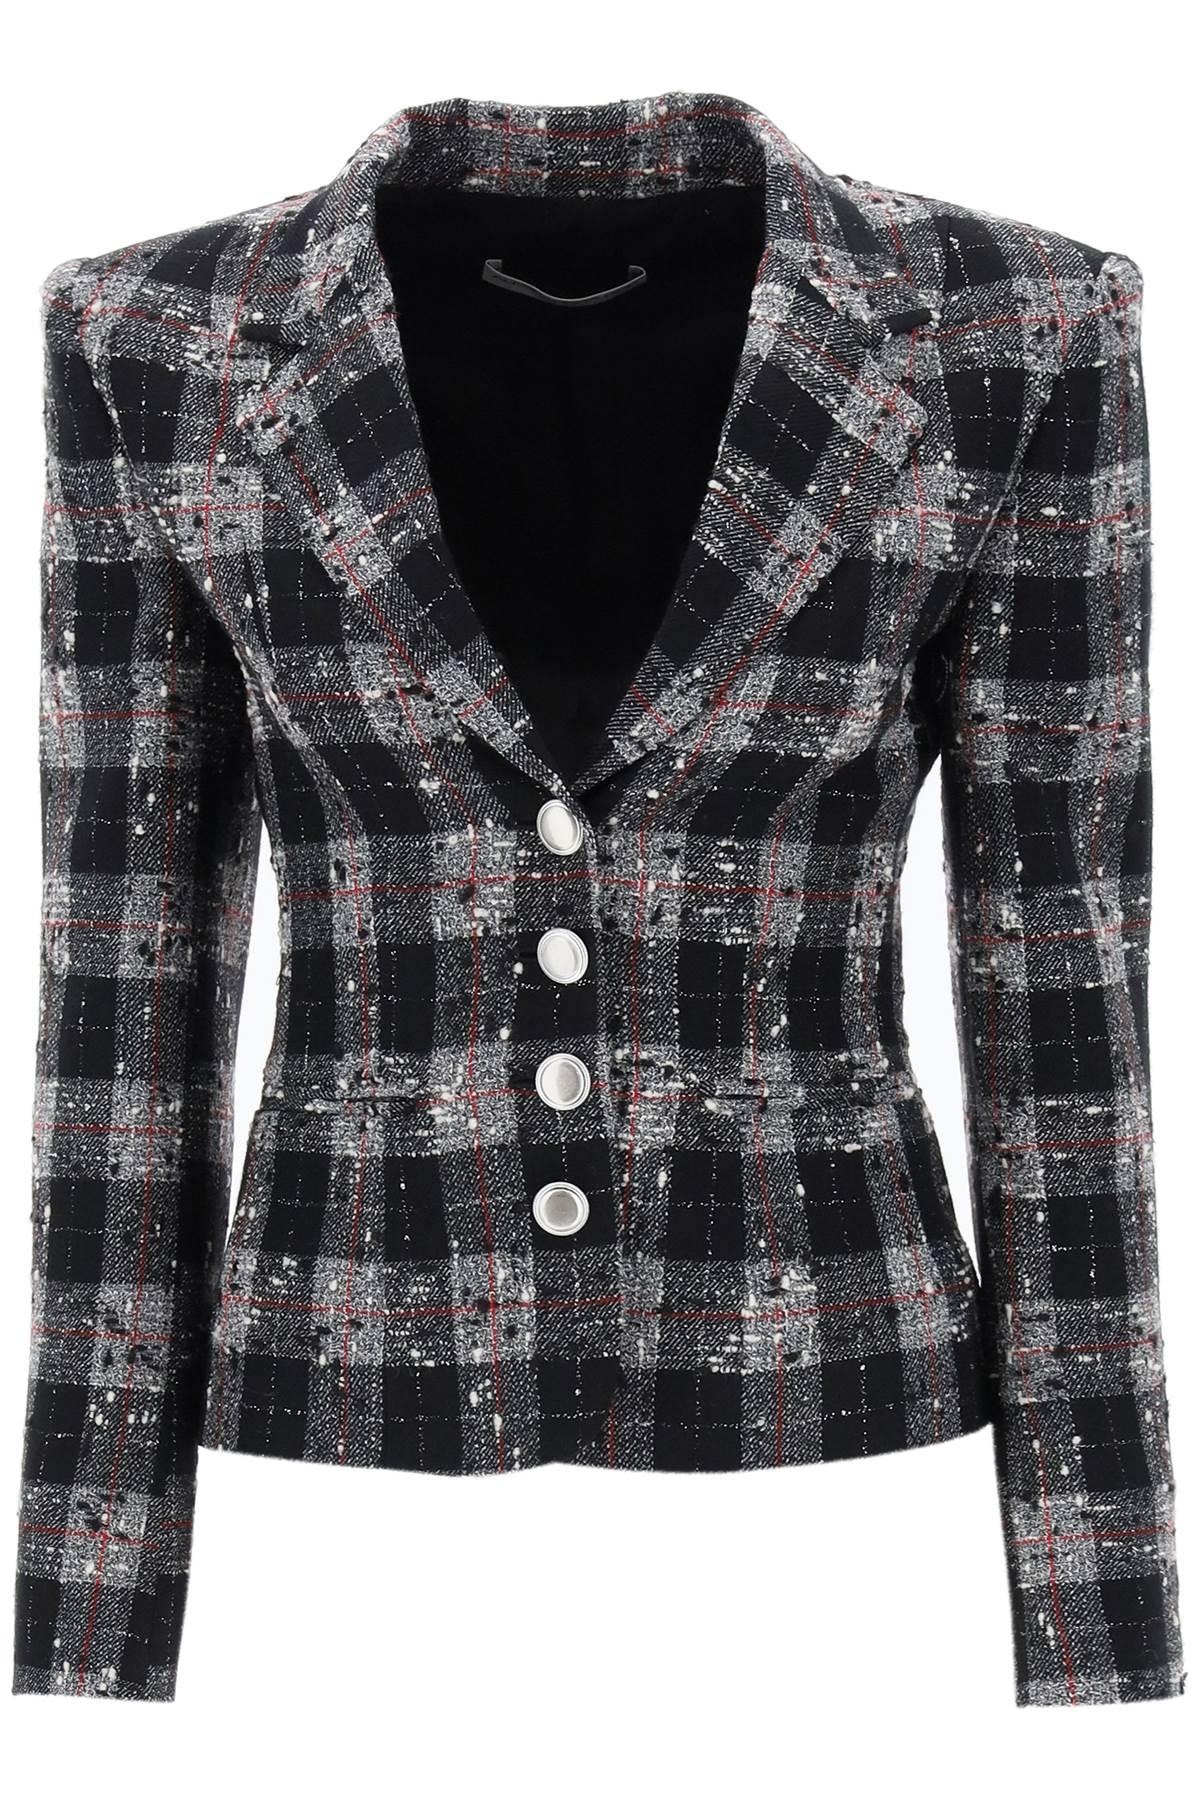 Alessandra Rich Single Breasted Jacket In Boucle' Fabric With Check Motif - 1